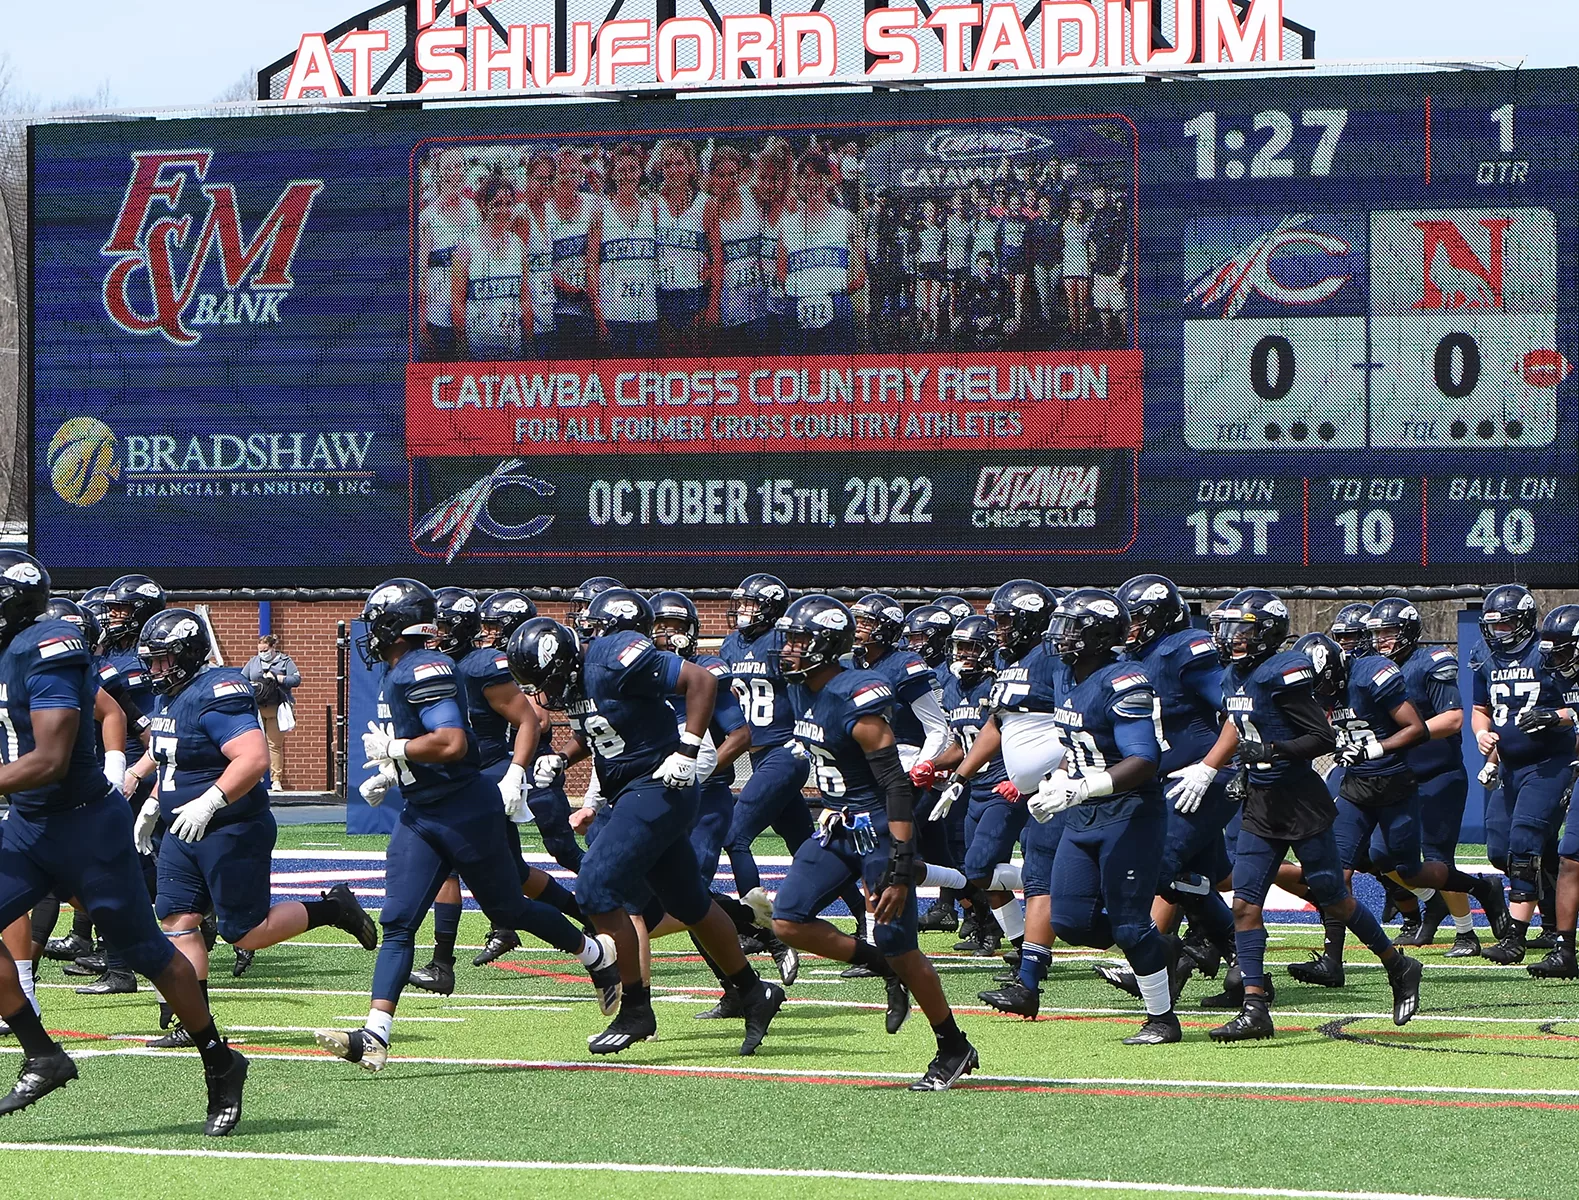 Football Players running in front of video scoreboard